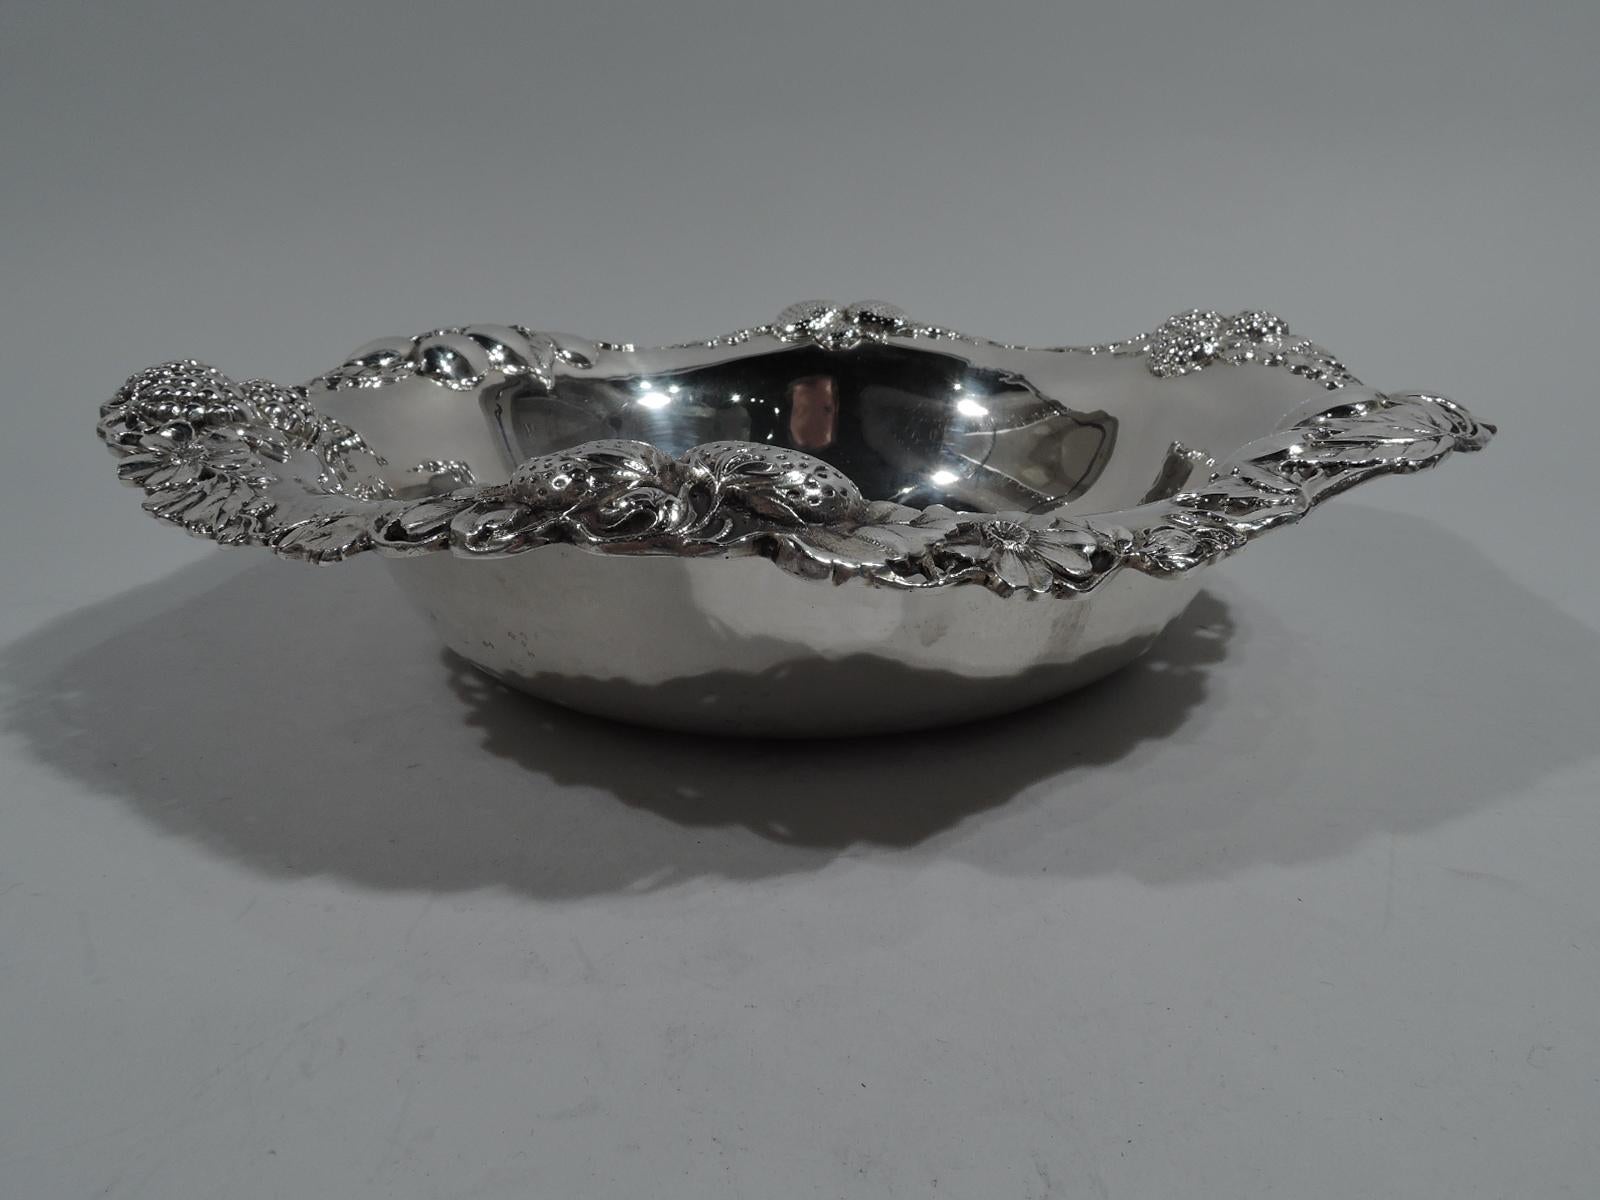 Sterling silver bowl. Made by Gorham in Providence in 1912. Plain well and pierced and wavy rim. Strawberries, blackberries, and cherries as well as blossoms applied to rim. A pretty design that captures the lush ripeness of the fruit. Fully marked